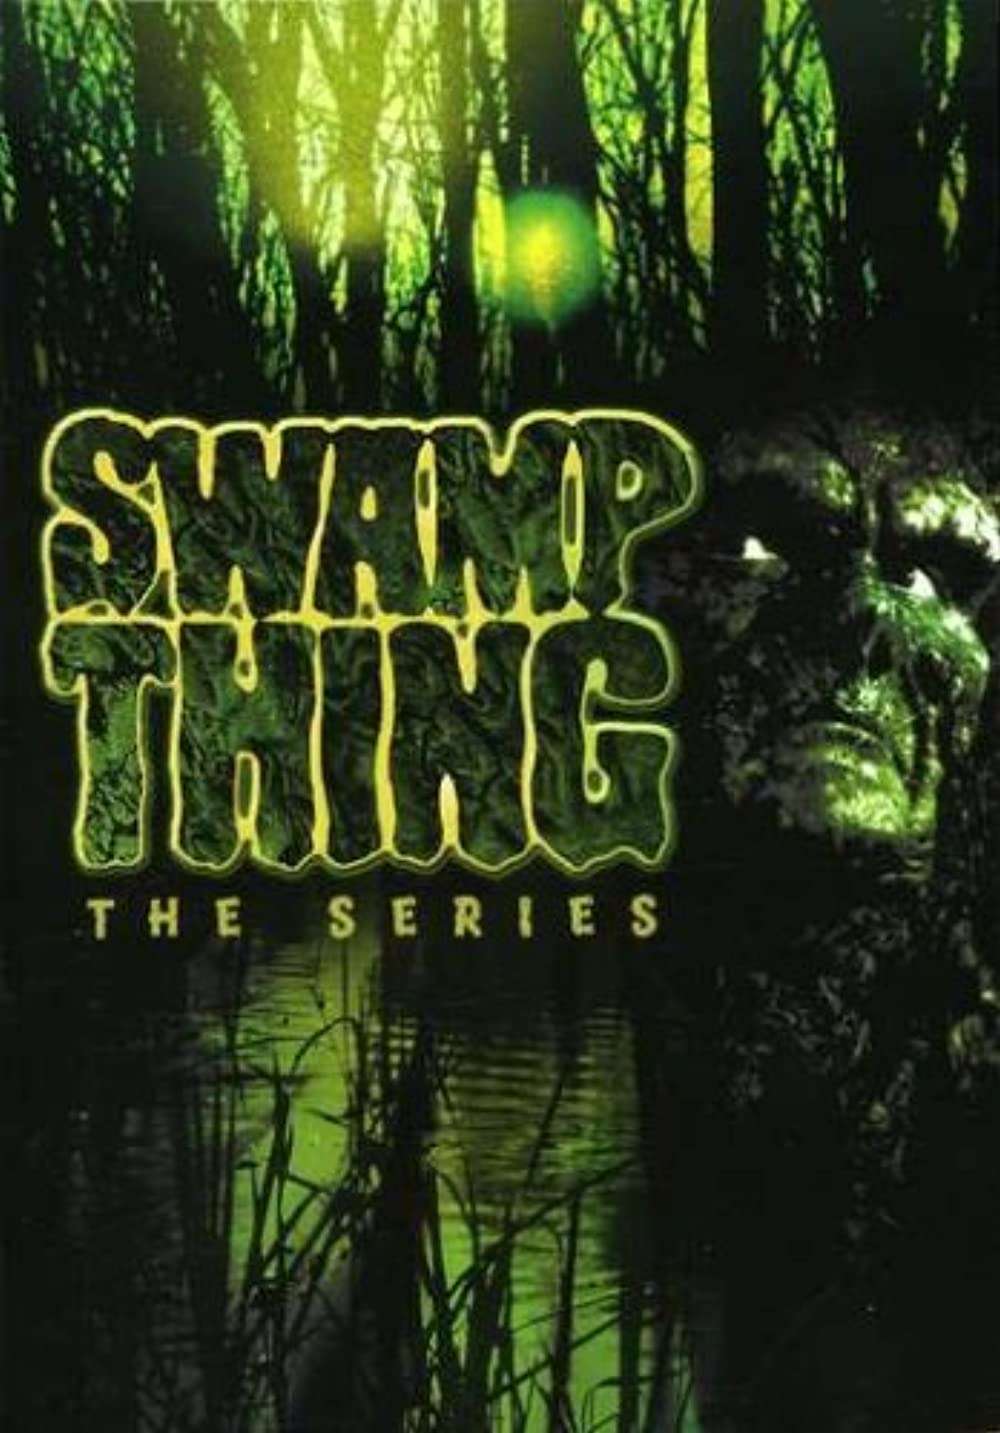 SWAMP THING THE SERIES – 1990